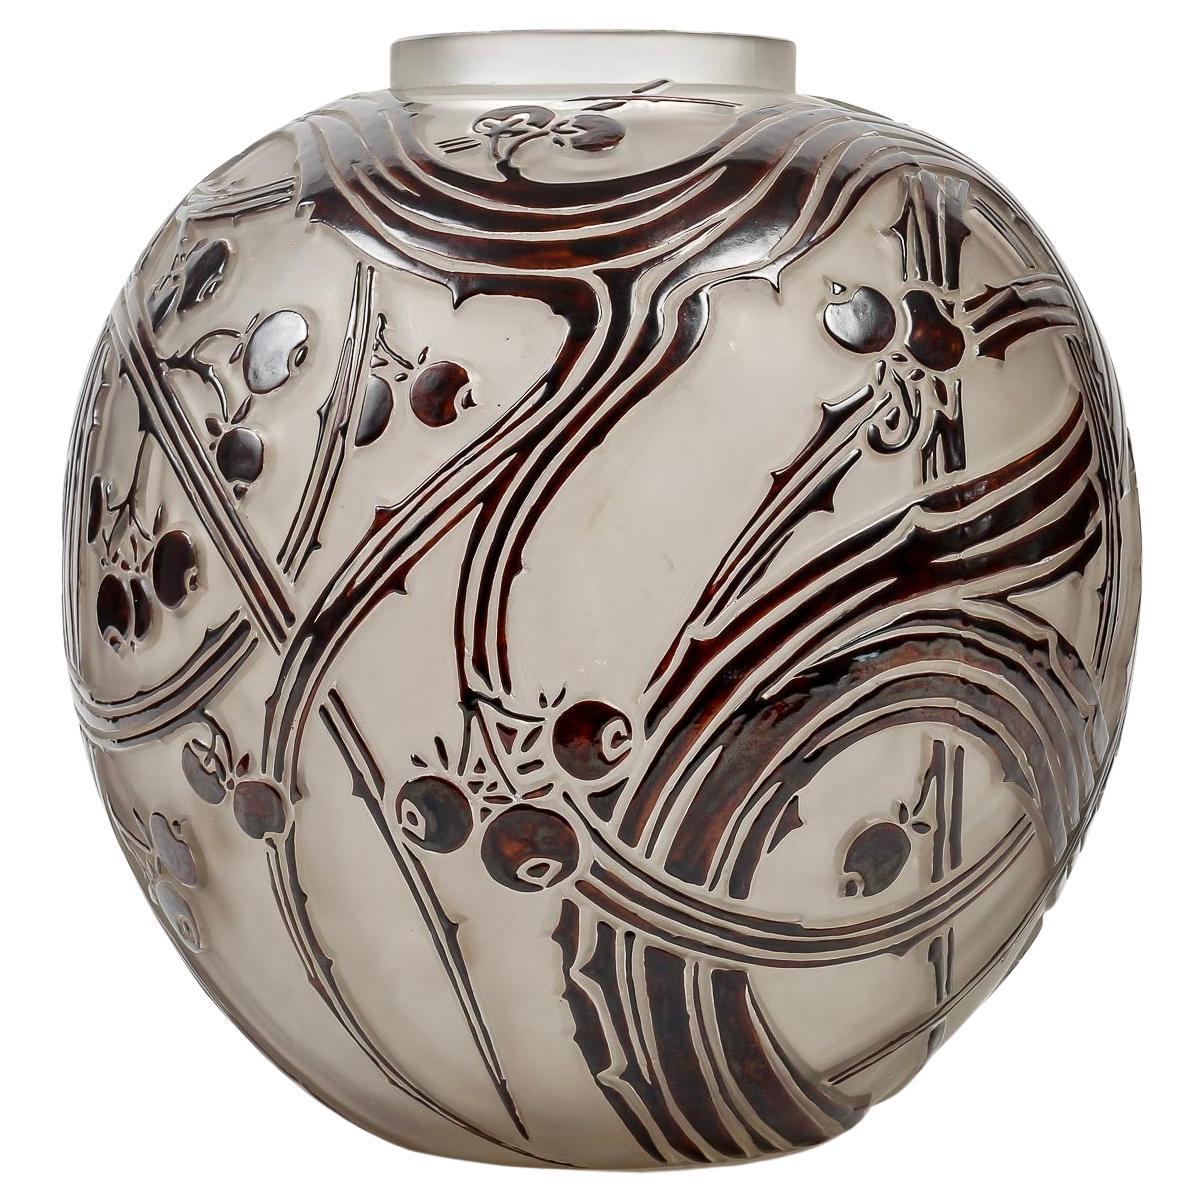 1924 Rene Lalique Vase Baies Frosted Glass with Brown Enamel For Sale